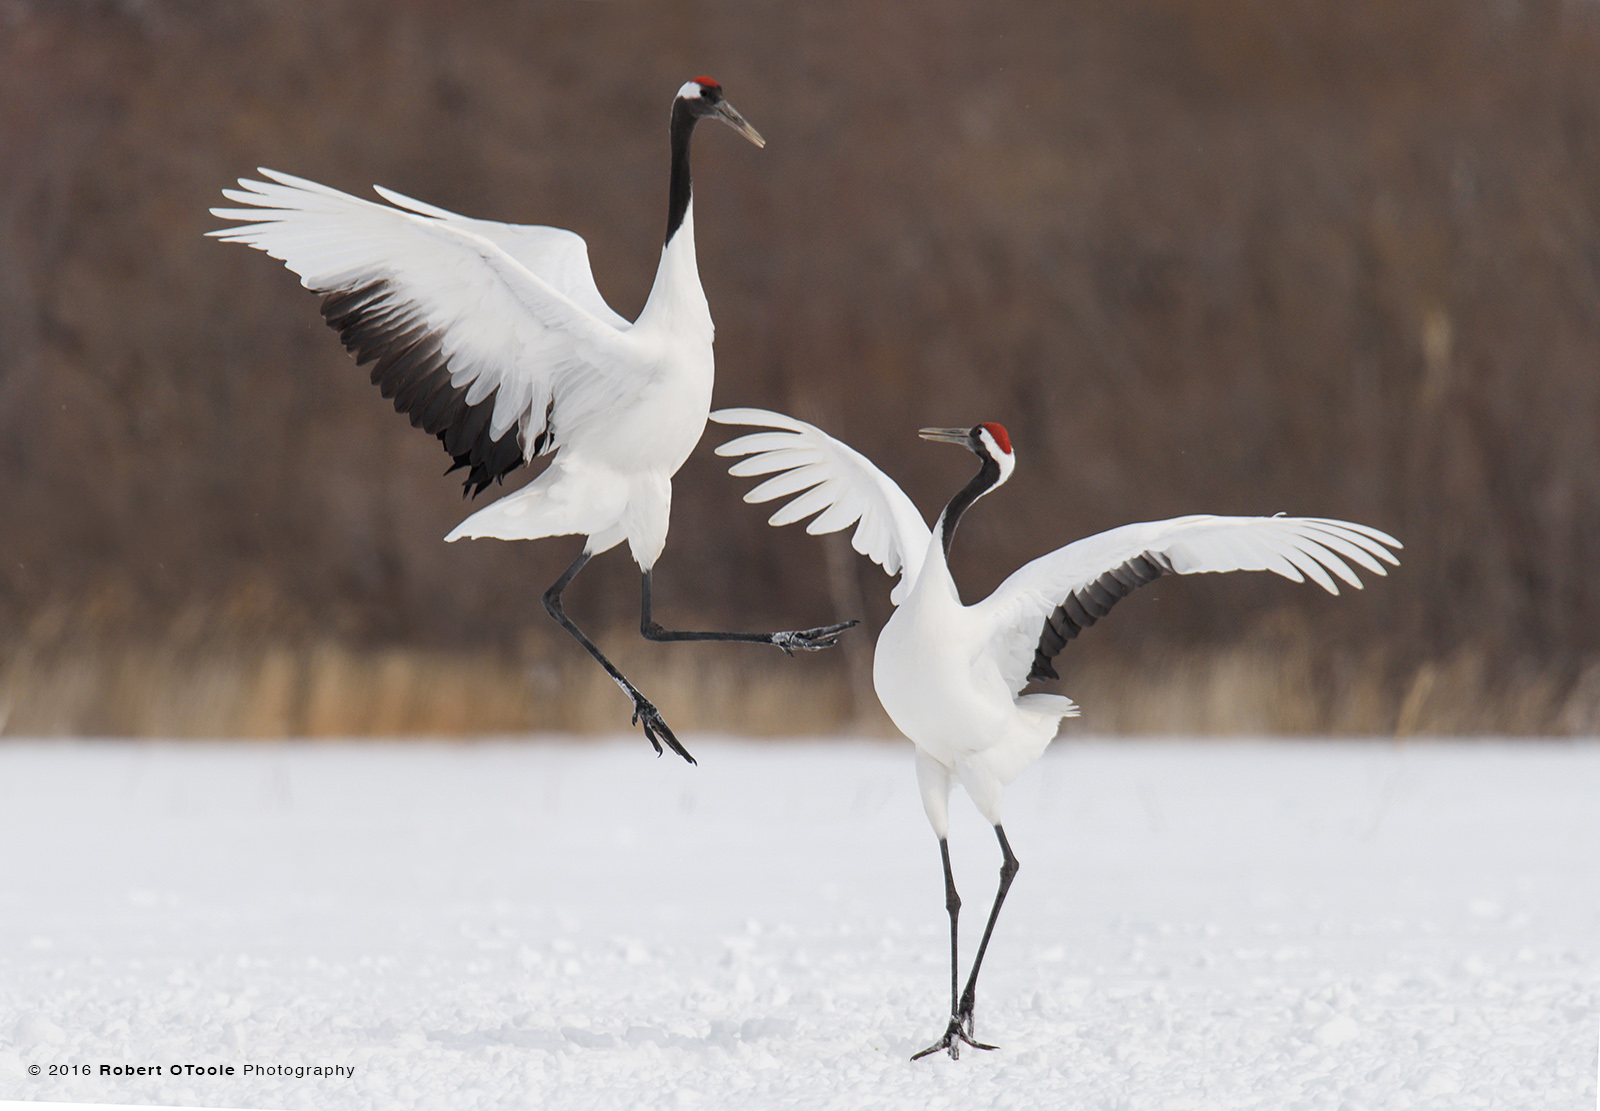   Pair of  Adult Red-Crowned Cranes Dancing on Snow 